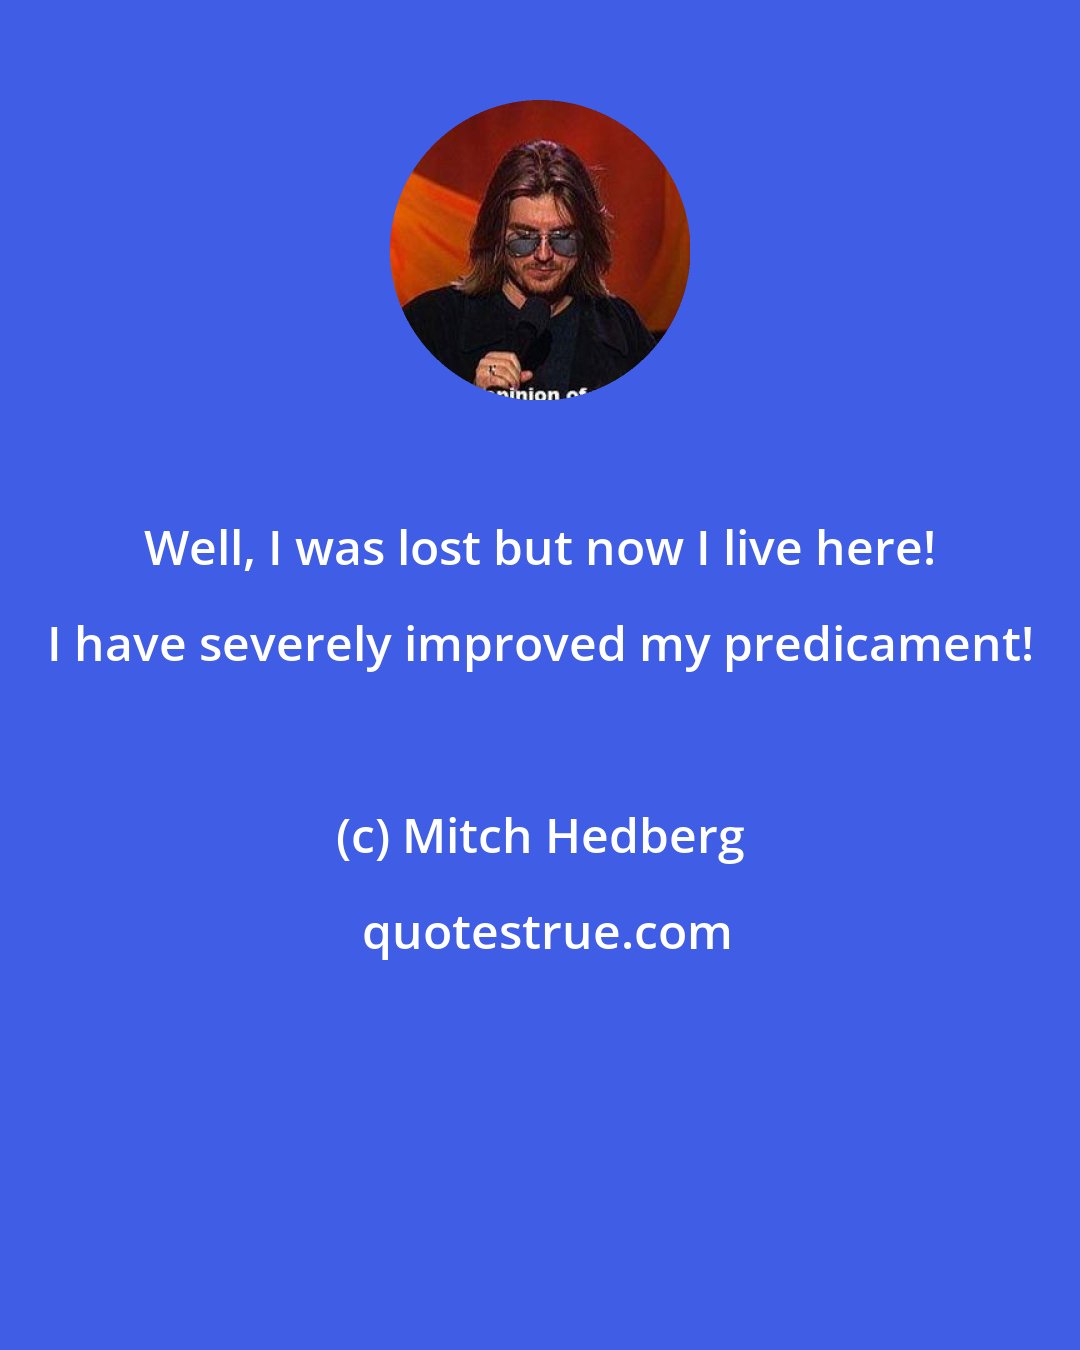 Mitch Hedberg: Well, I was lost but now I live here! I have severely improved my predicament!